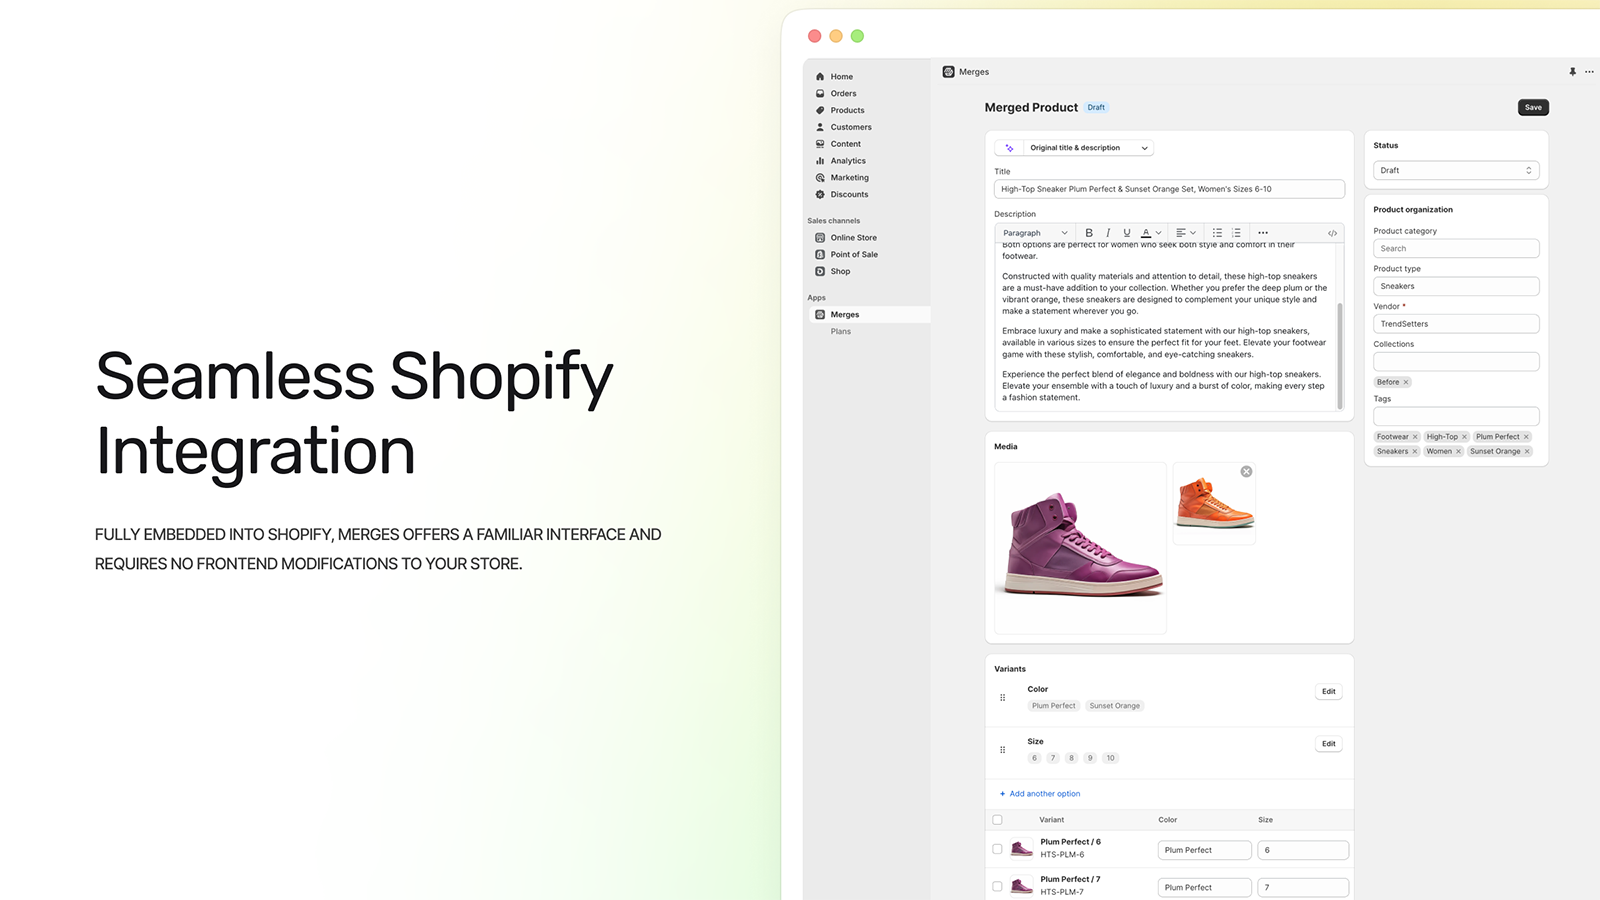 App fully embedded within the Shopify experience